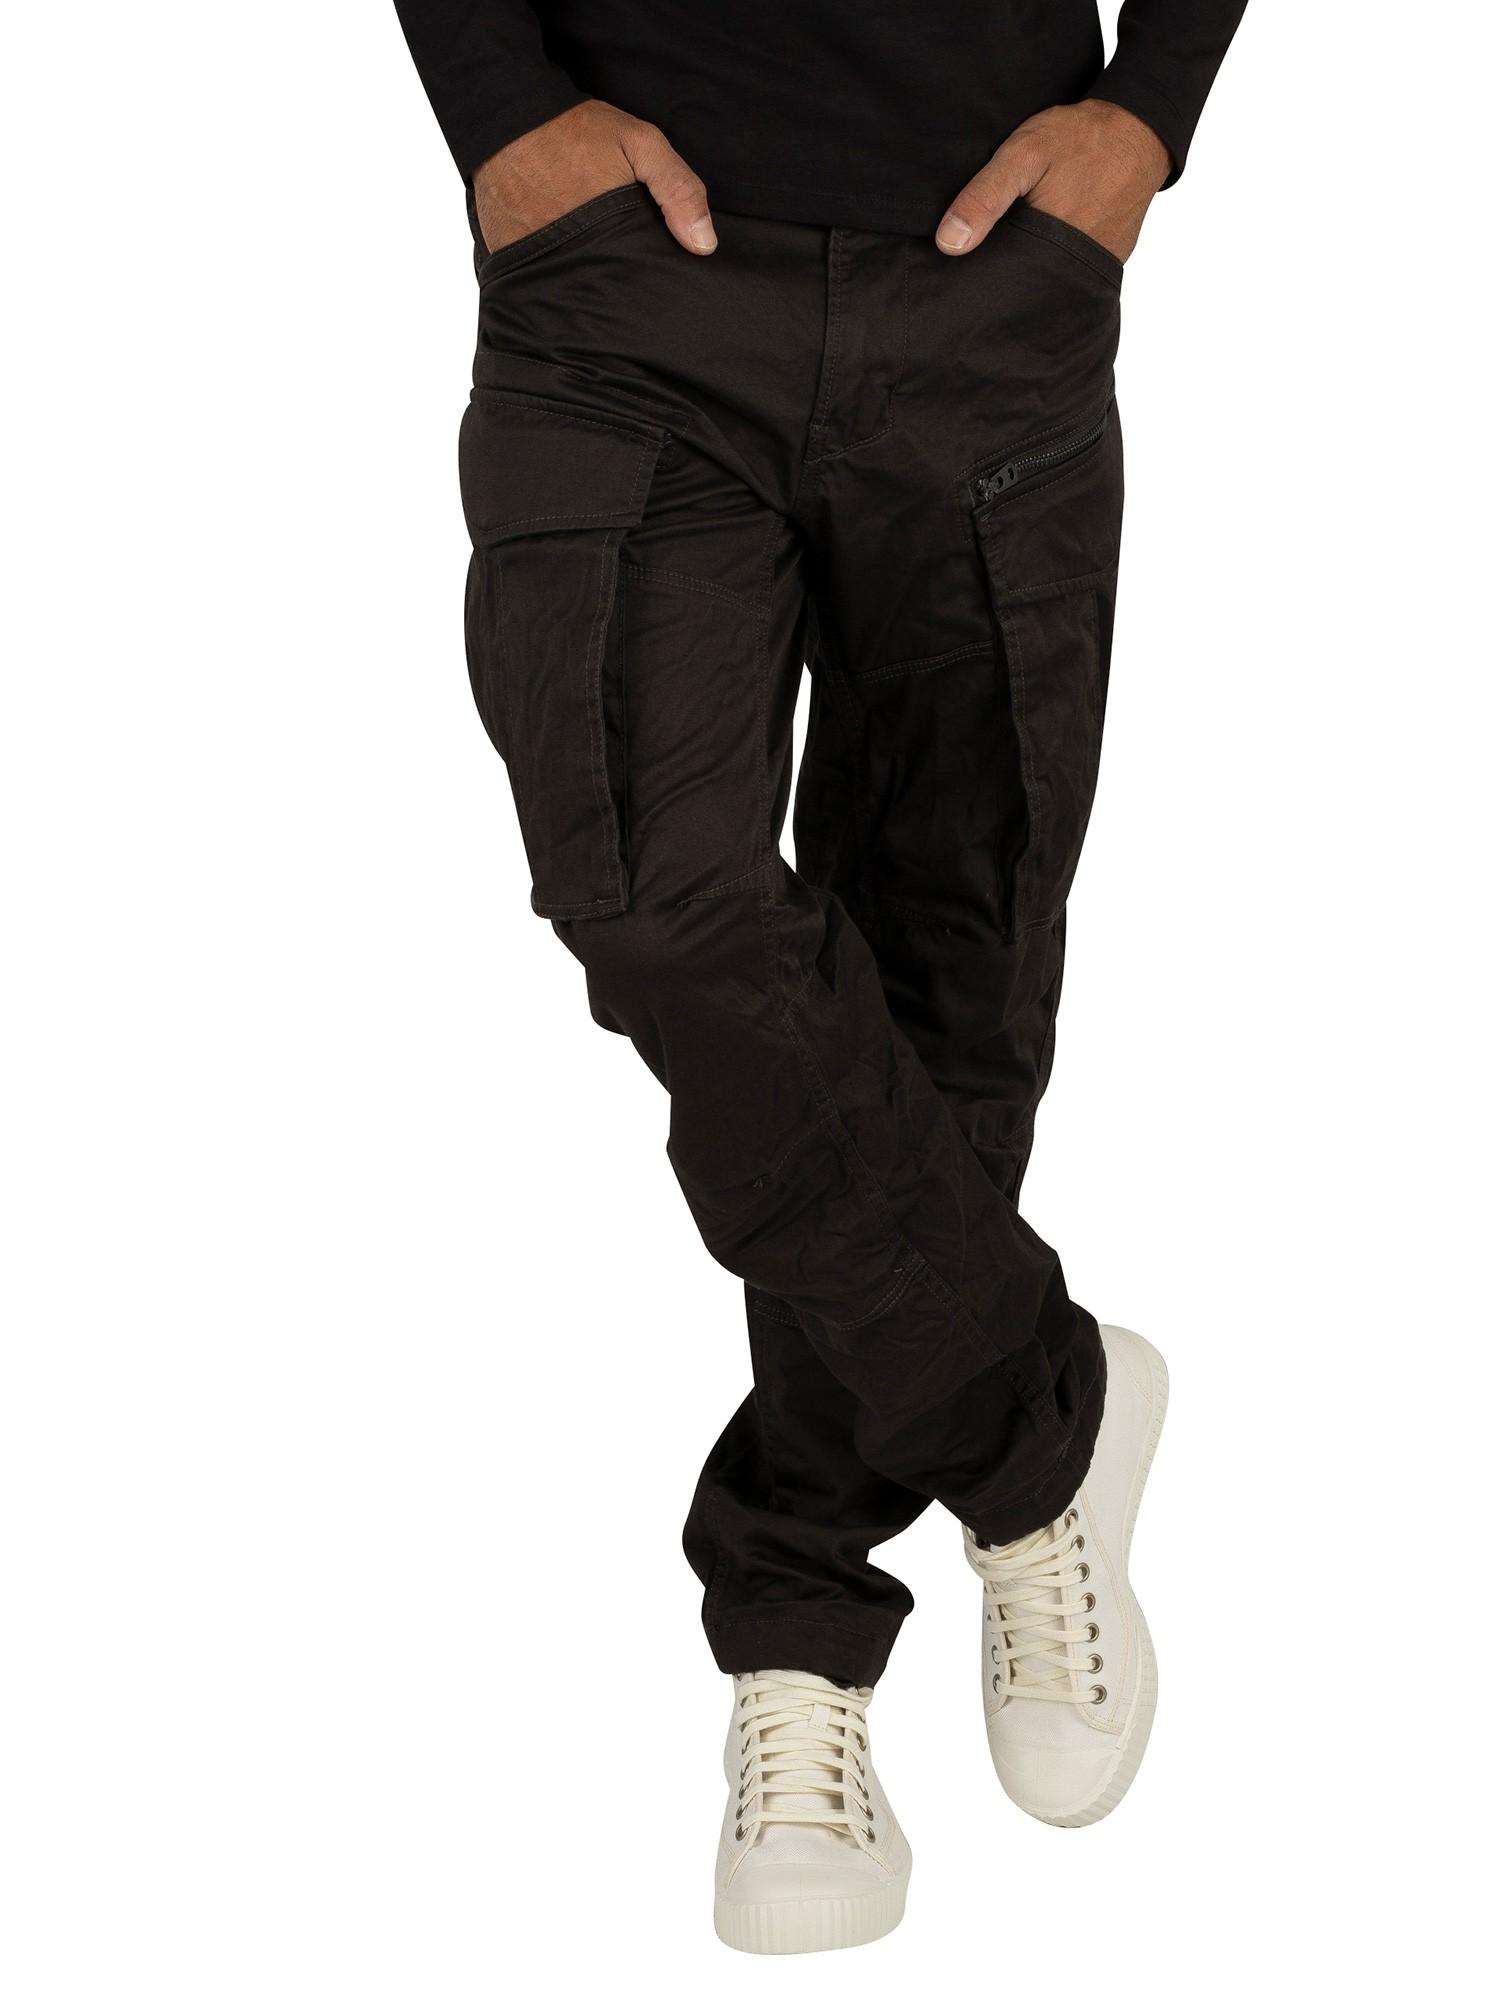 G-Star RAW Rovic Zip 3d Straight Tapered Cargos in Black for Men - Save 42%  - Lyst